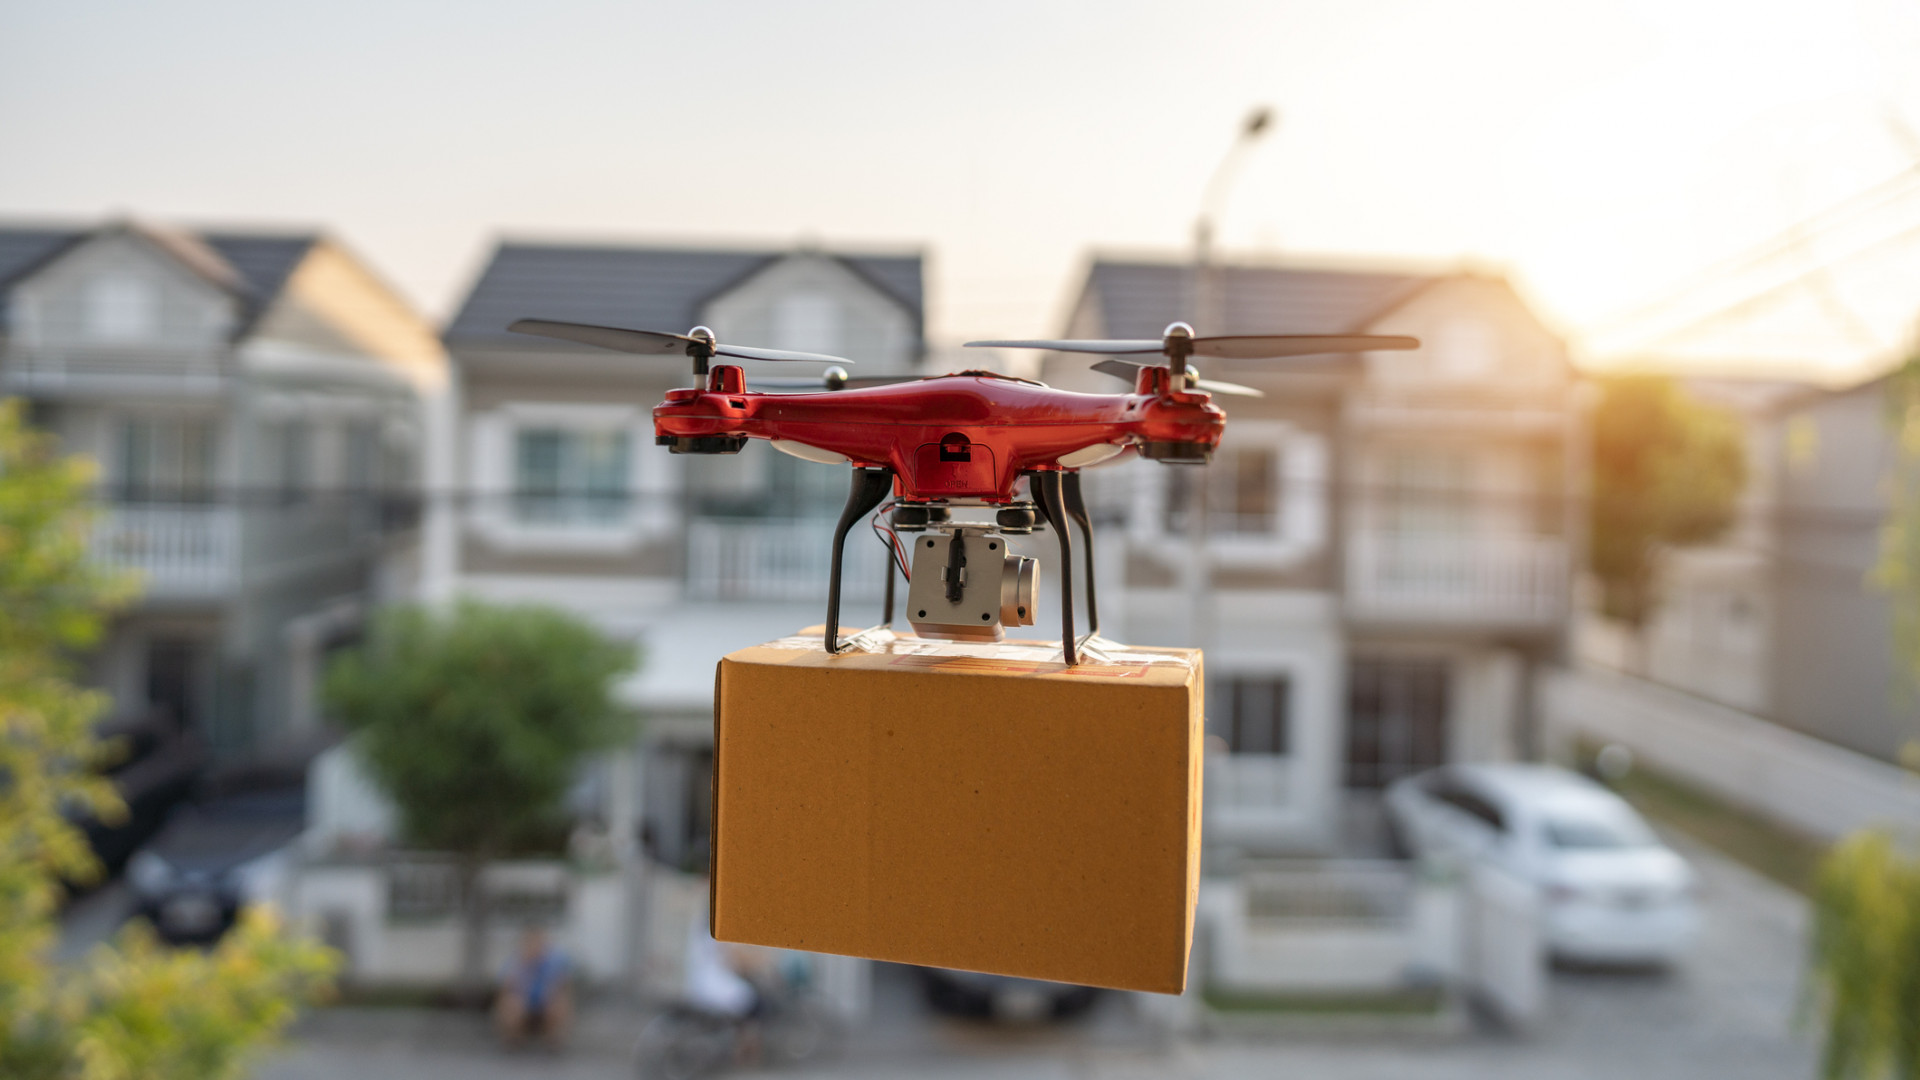 Commercial delivery drones investing iob forex branches chennai hotels